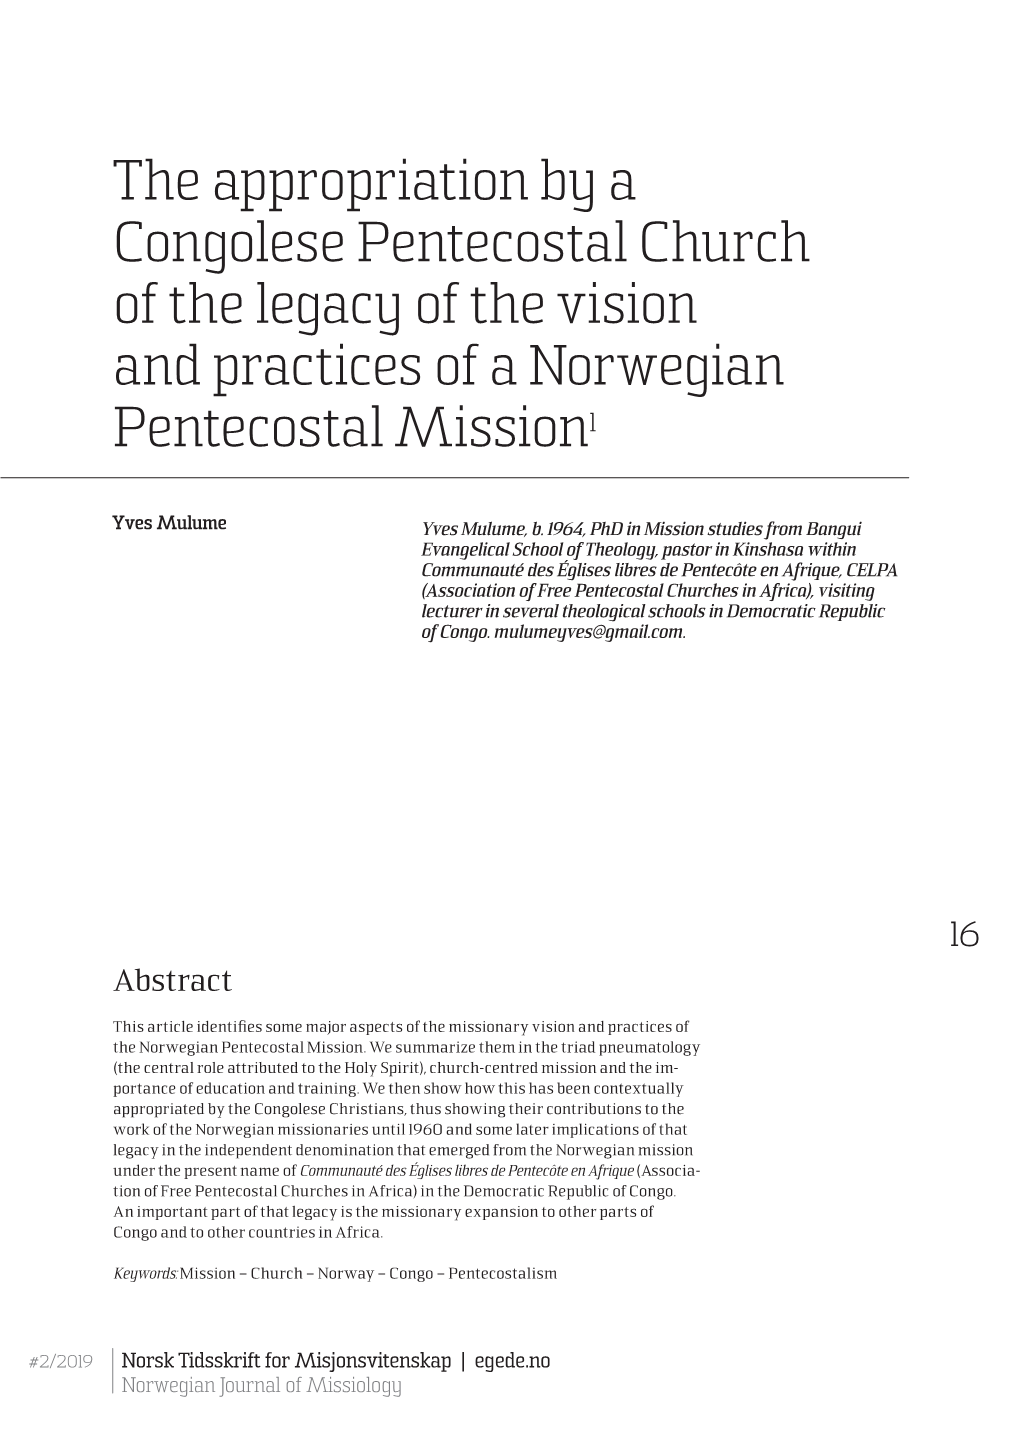 The Appropriation by a Congolese Pentecostal Church of the Legacy of the Vision and Practices of a Norwegian Pentecostal Mission1